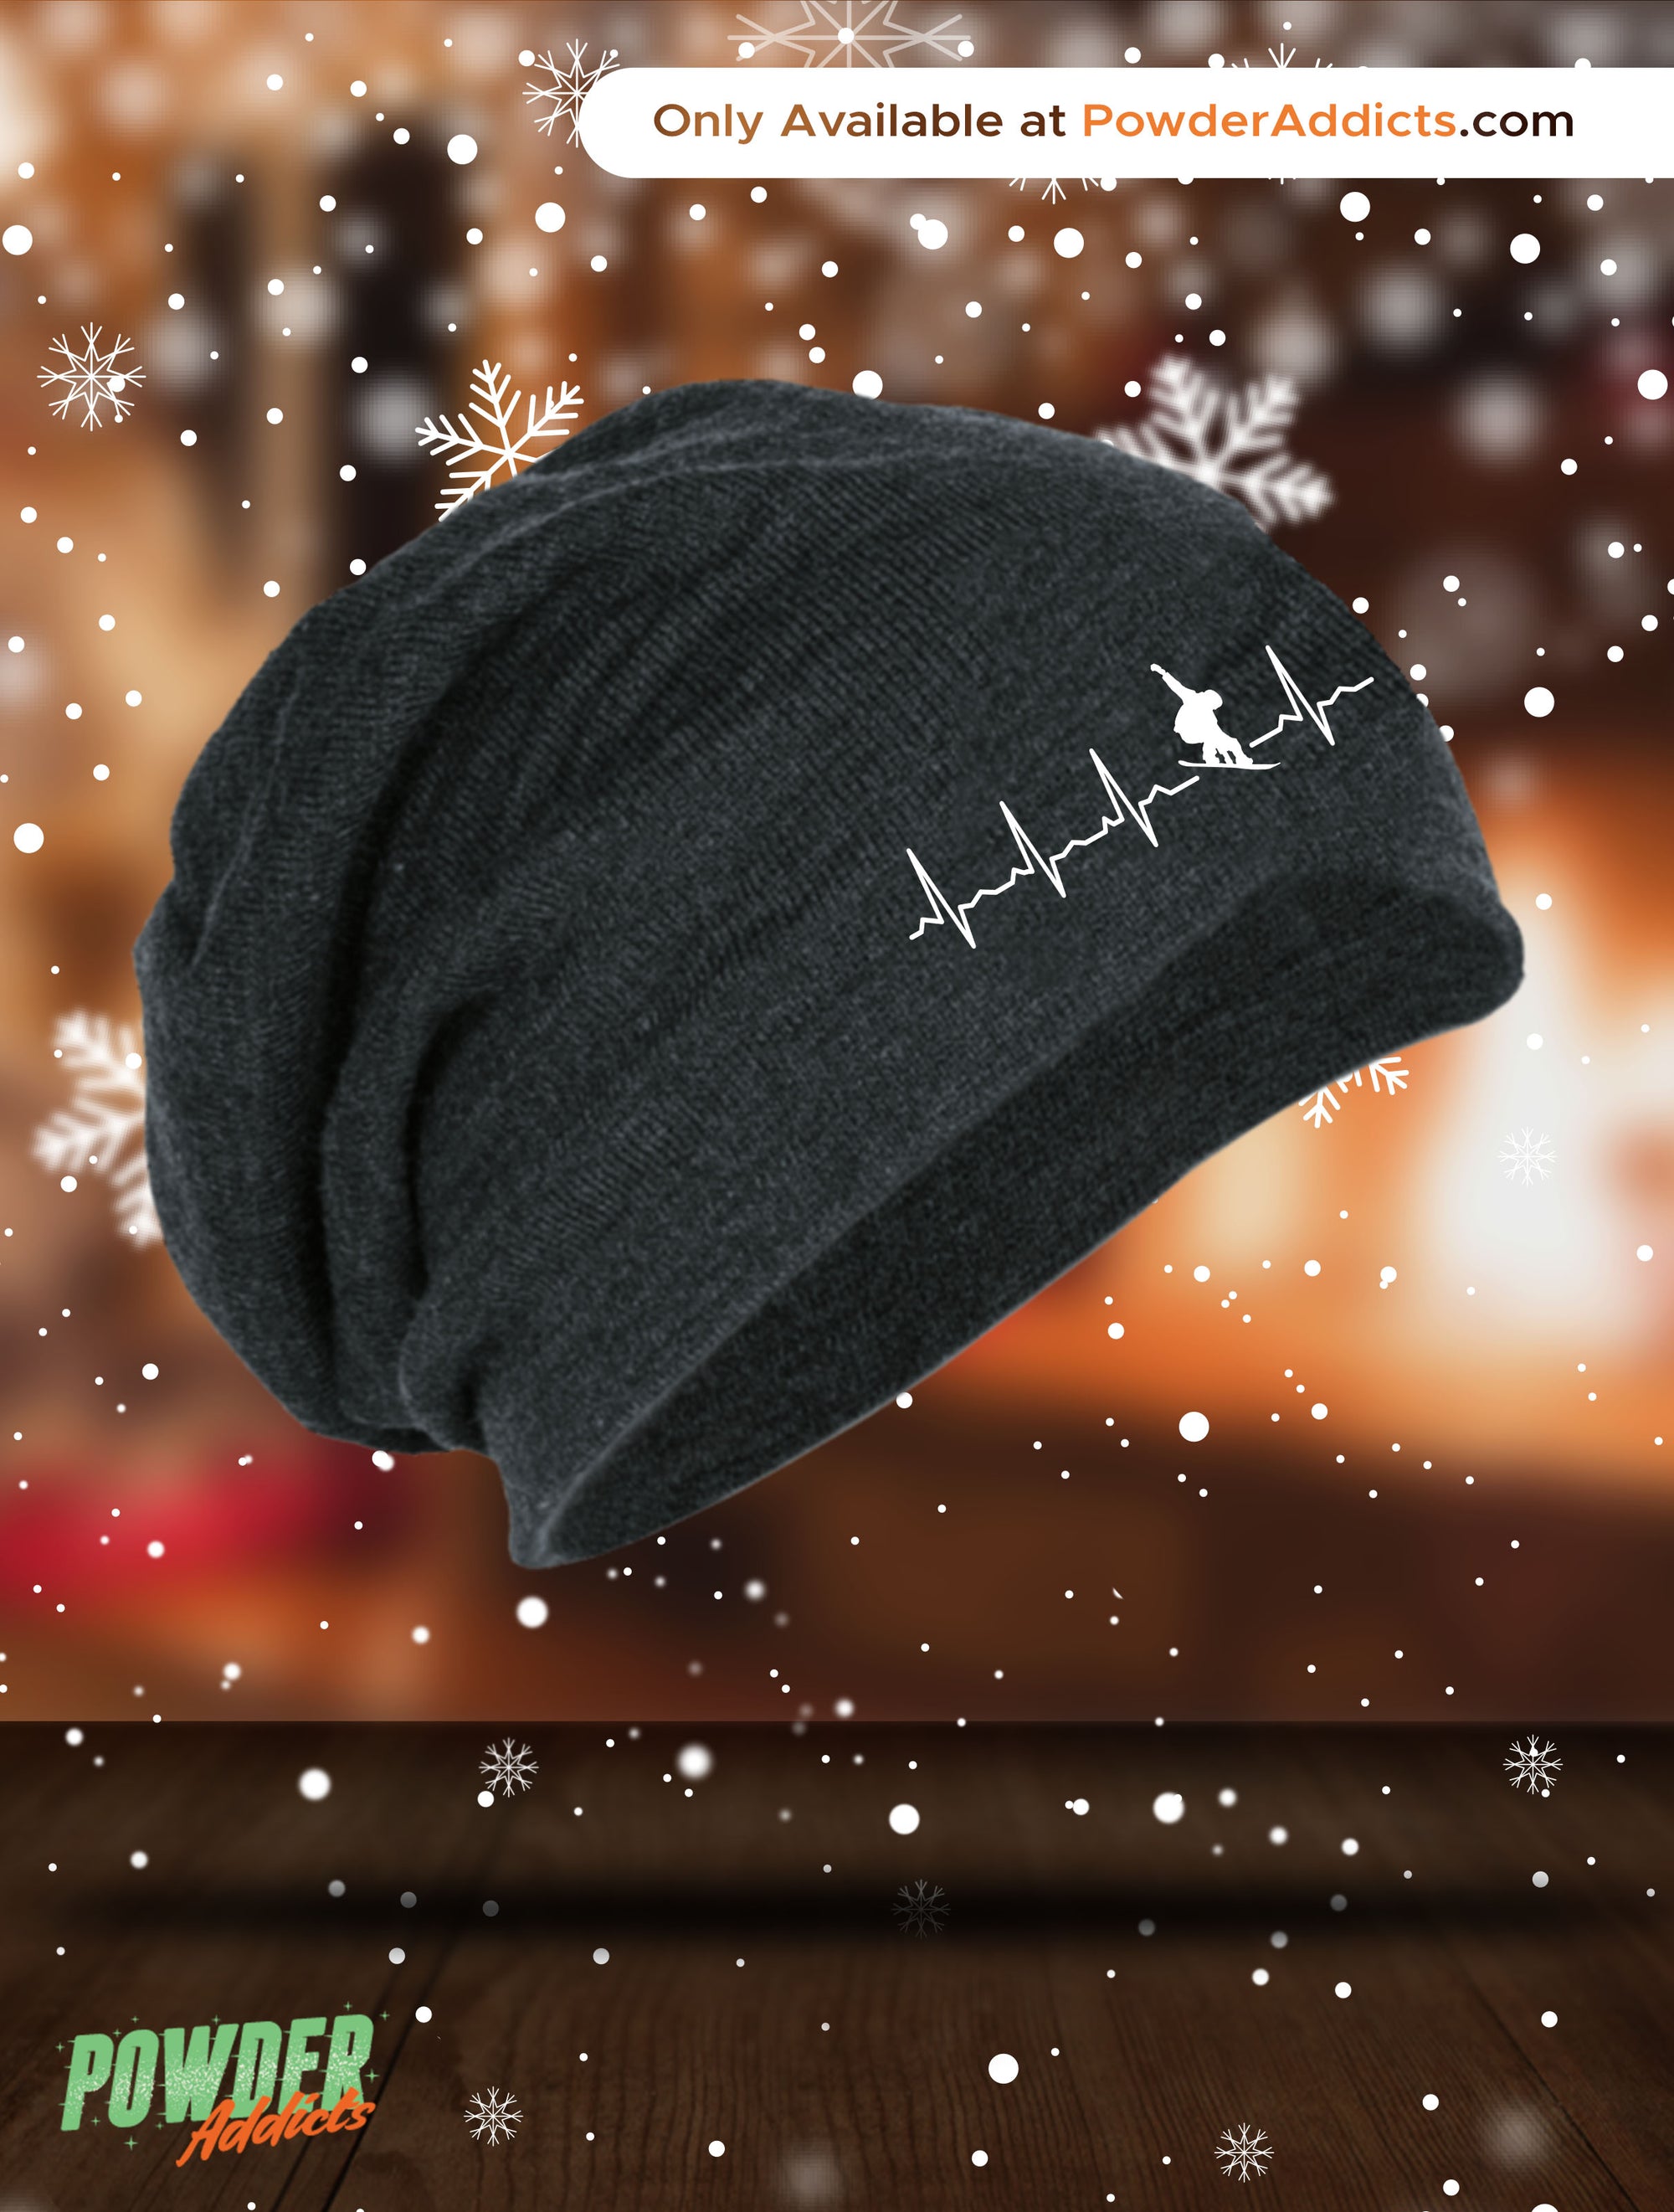 Snowboard is My Heartbeat Slouch Beanie - Powderaddicts